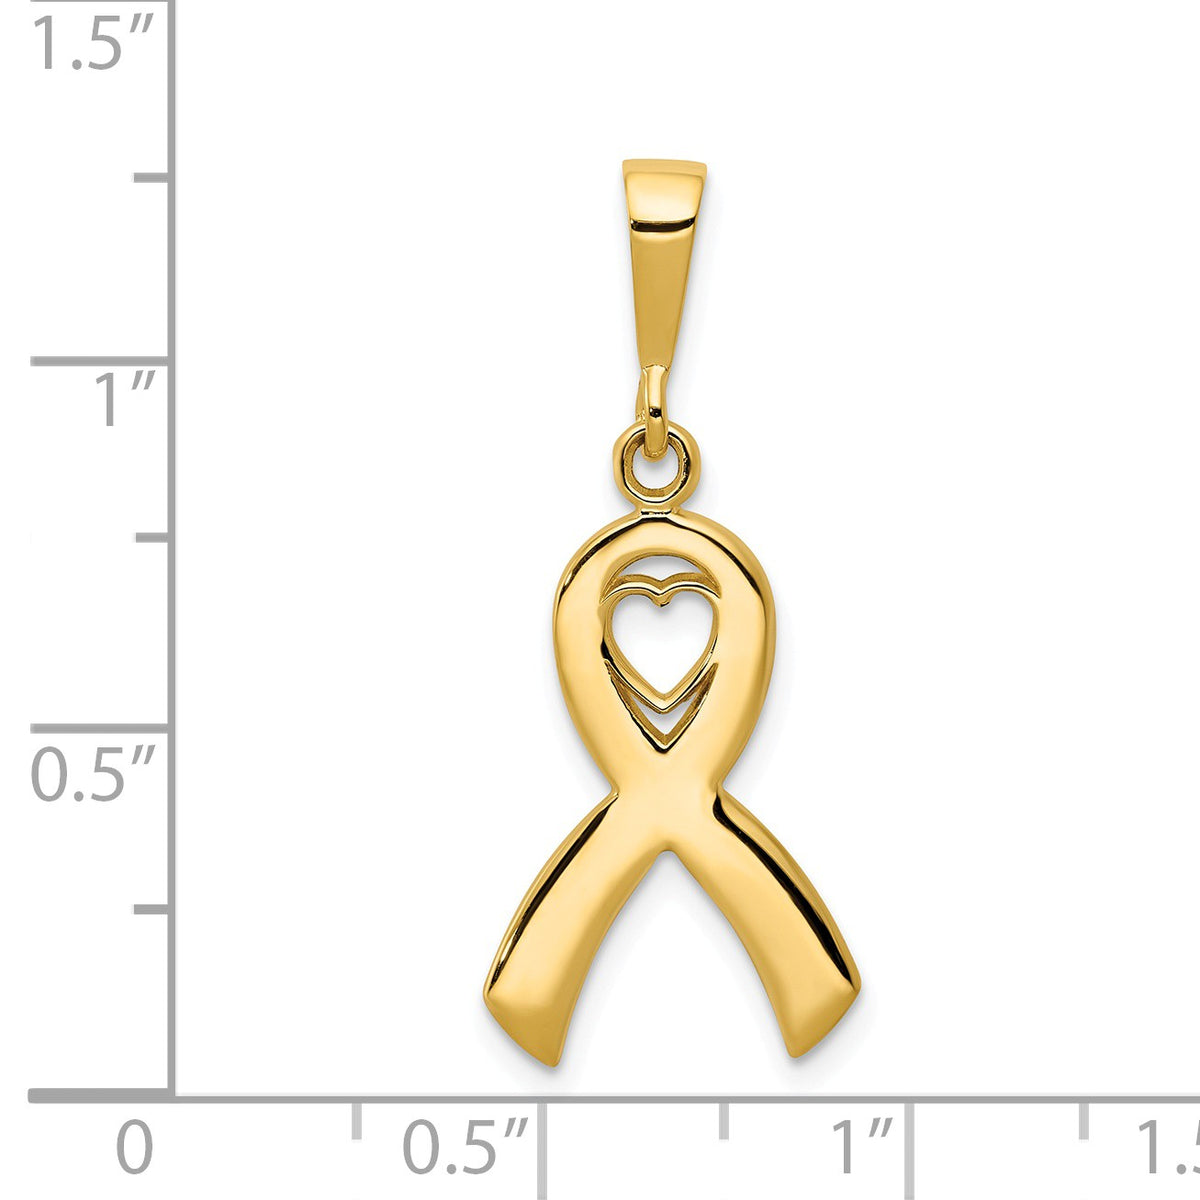 Alternate view of the 14k Yellow Gold Polished Heart in Awareness Ribbon Pendant by The Black Bow Jewelry Co.